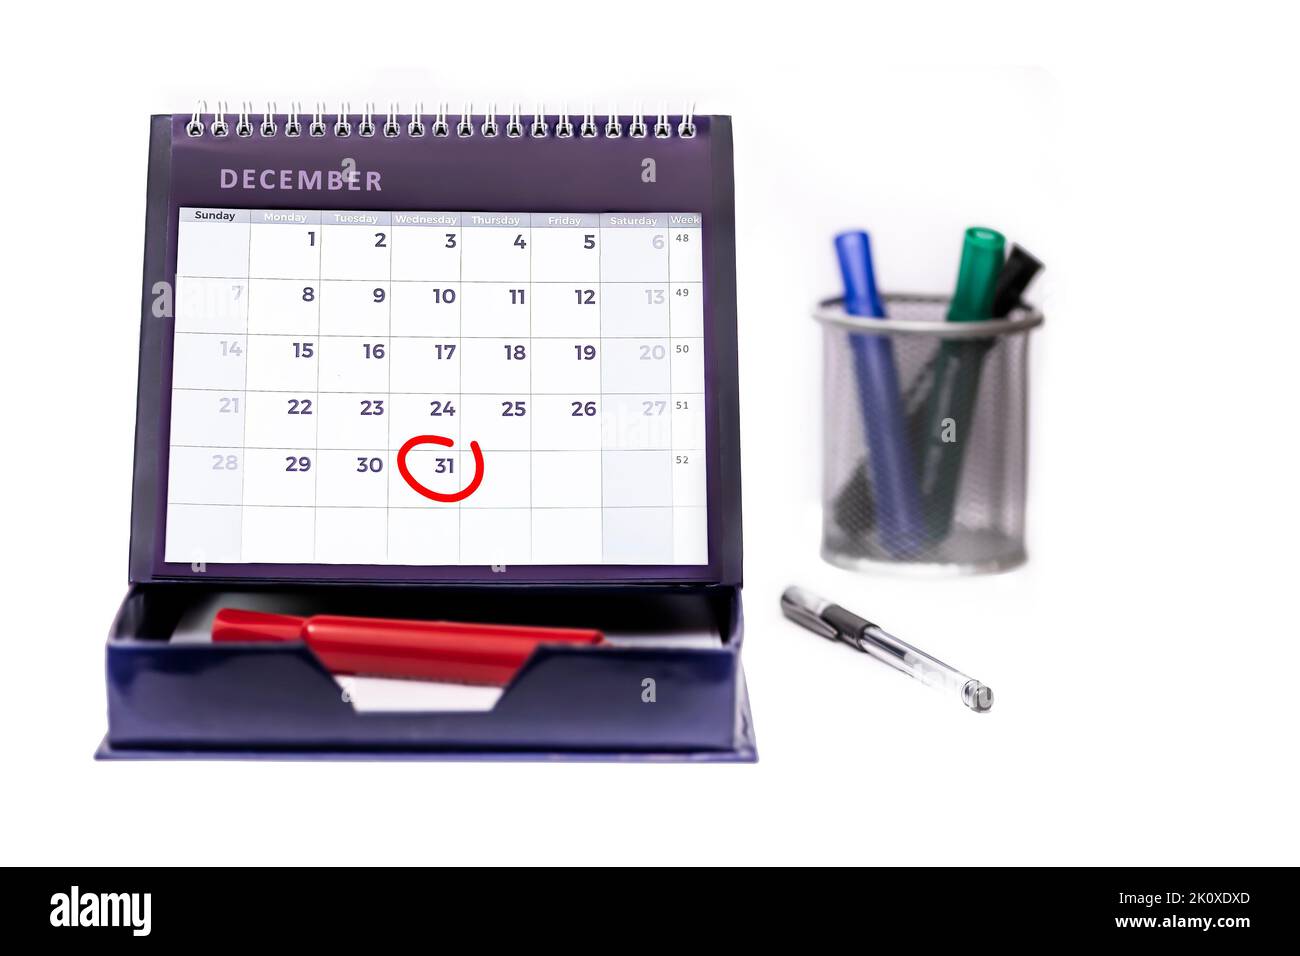 Red circle round date of 31st December on a business desk diary isolated on a white background Stock Photo